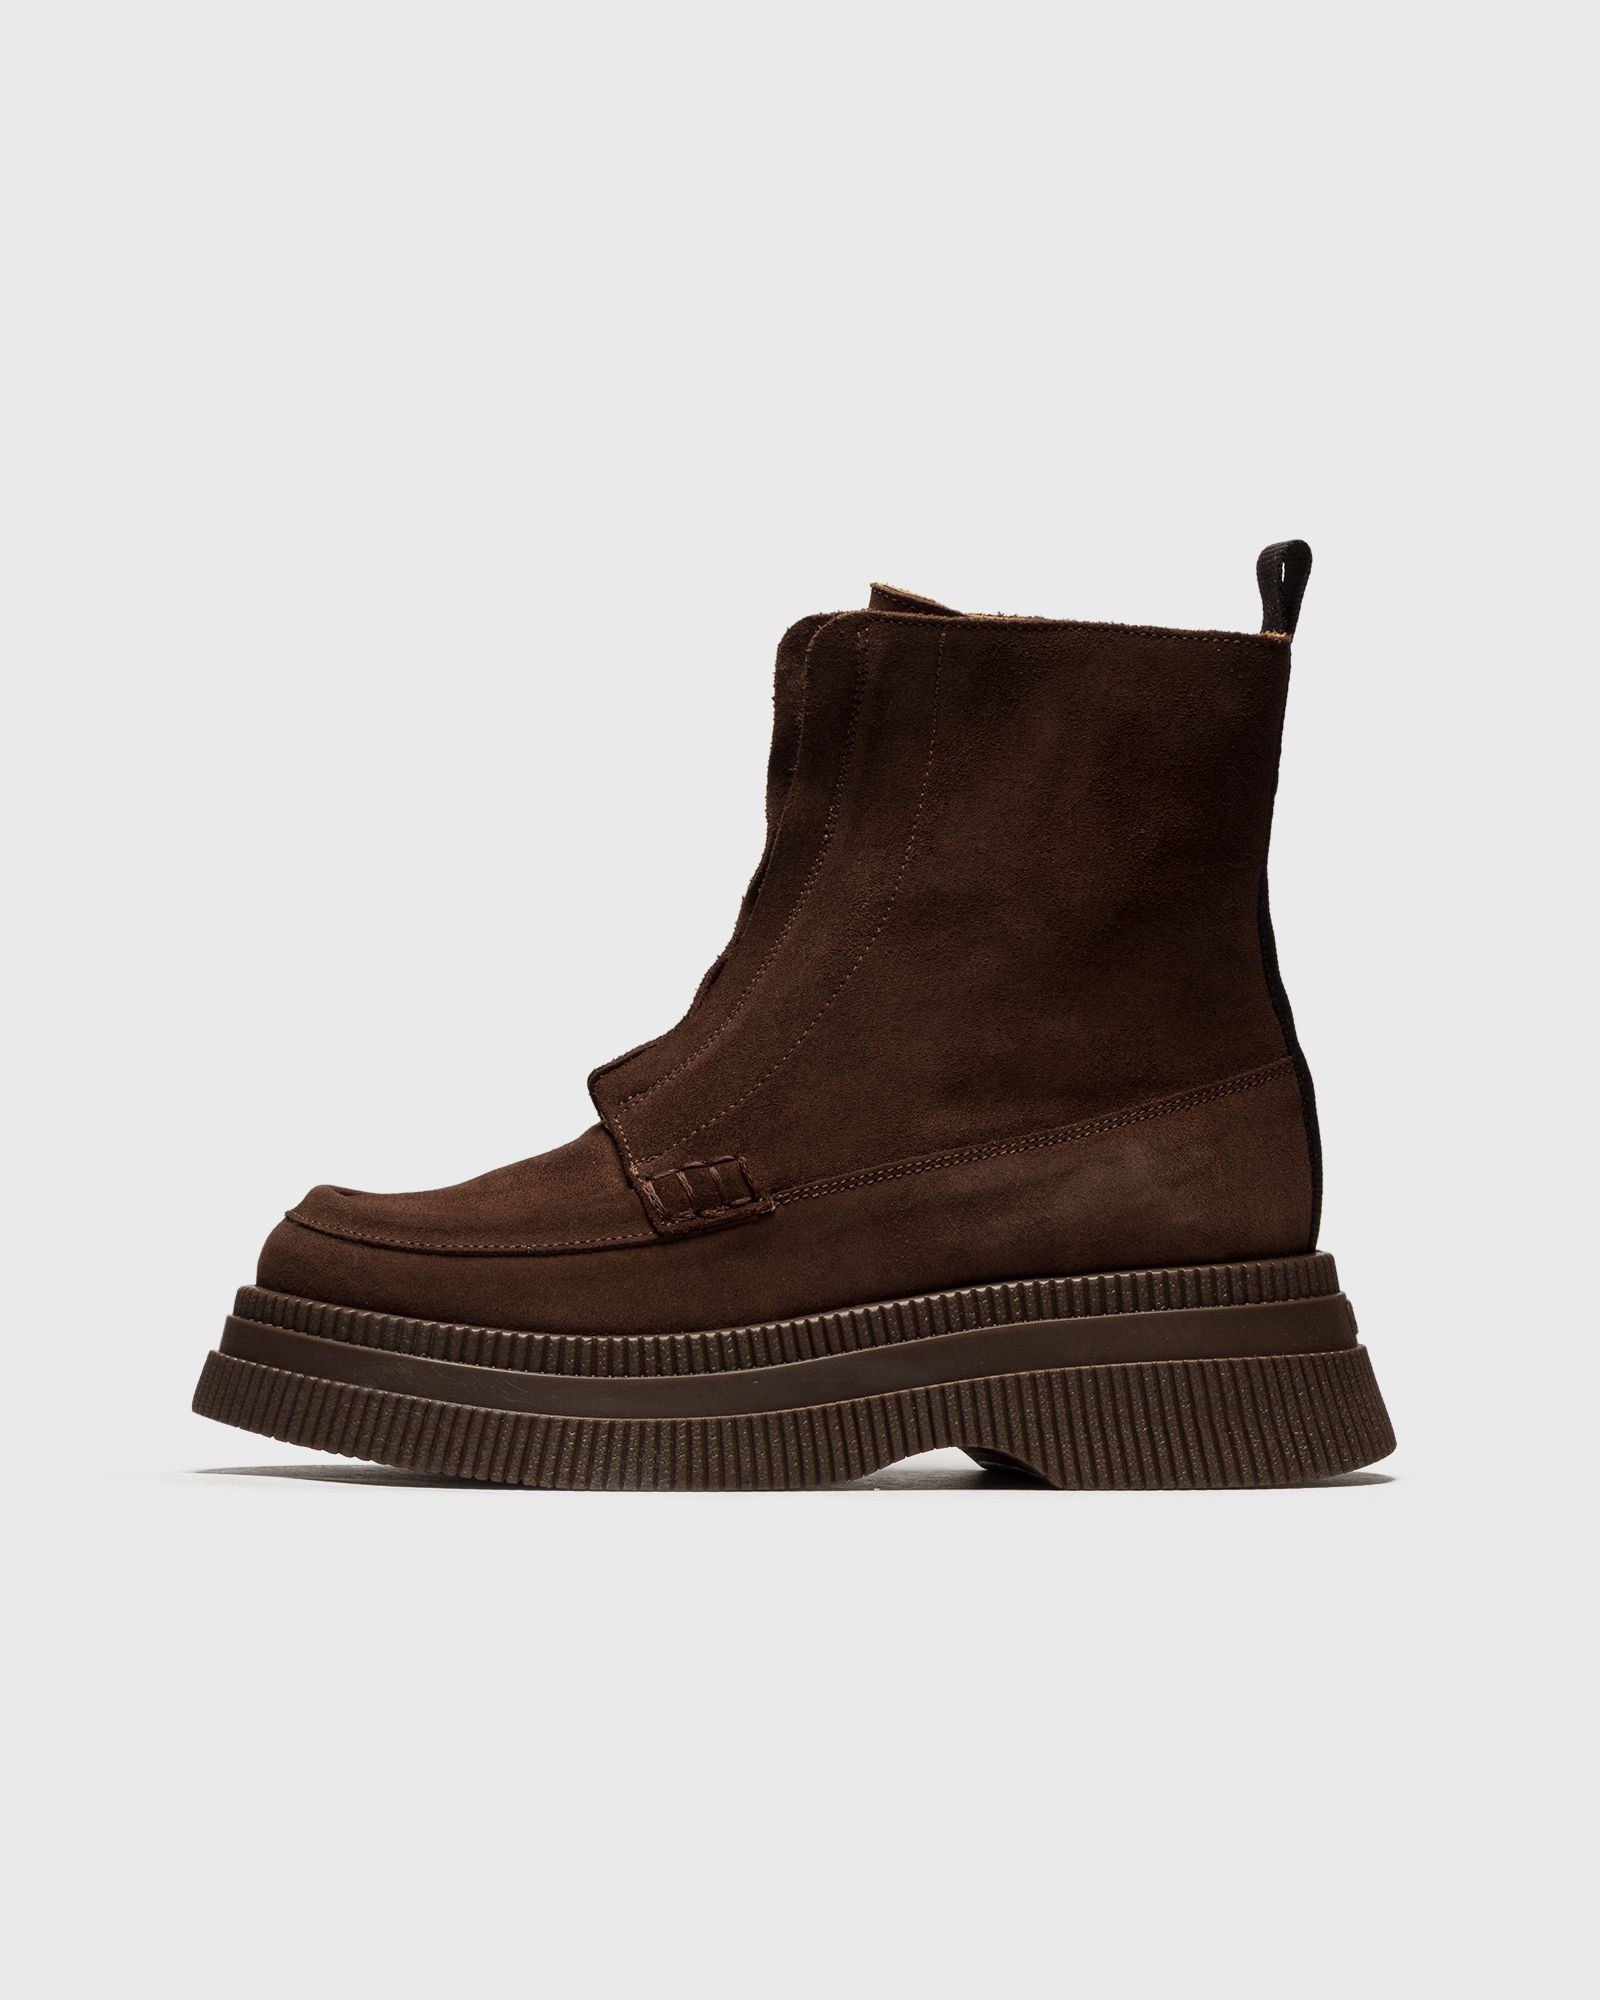 Ganni - creepers wallaby zip boot suede women boots brown in größe:37